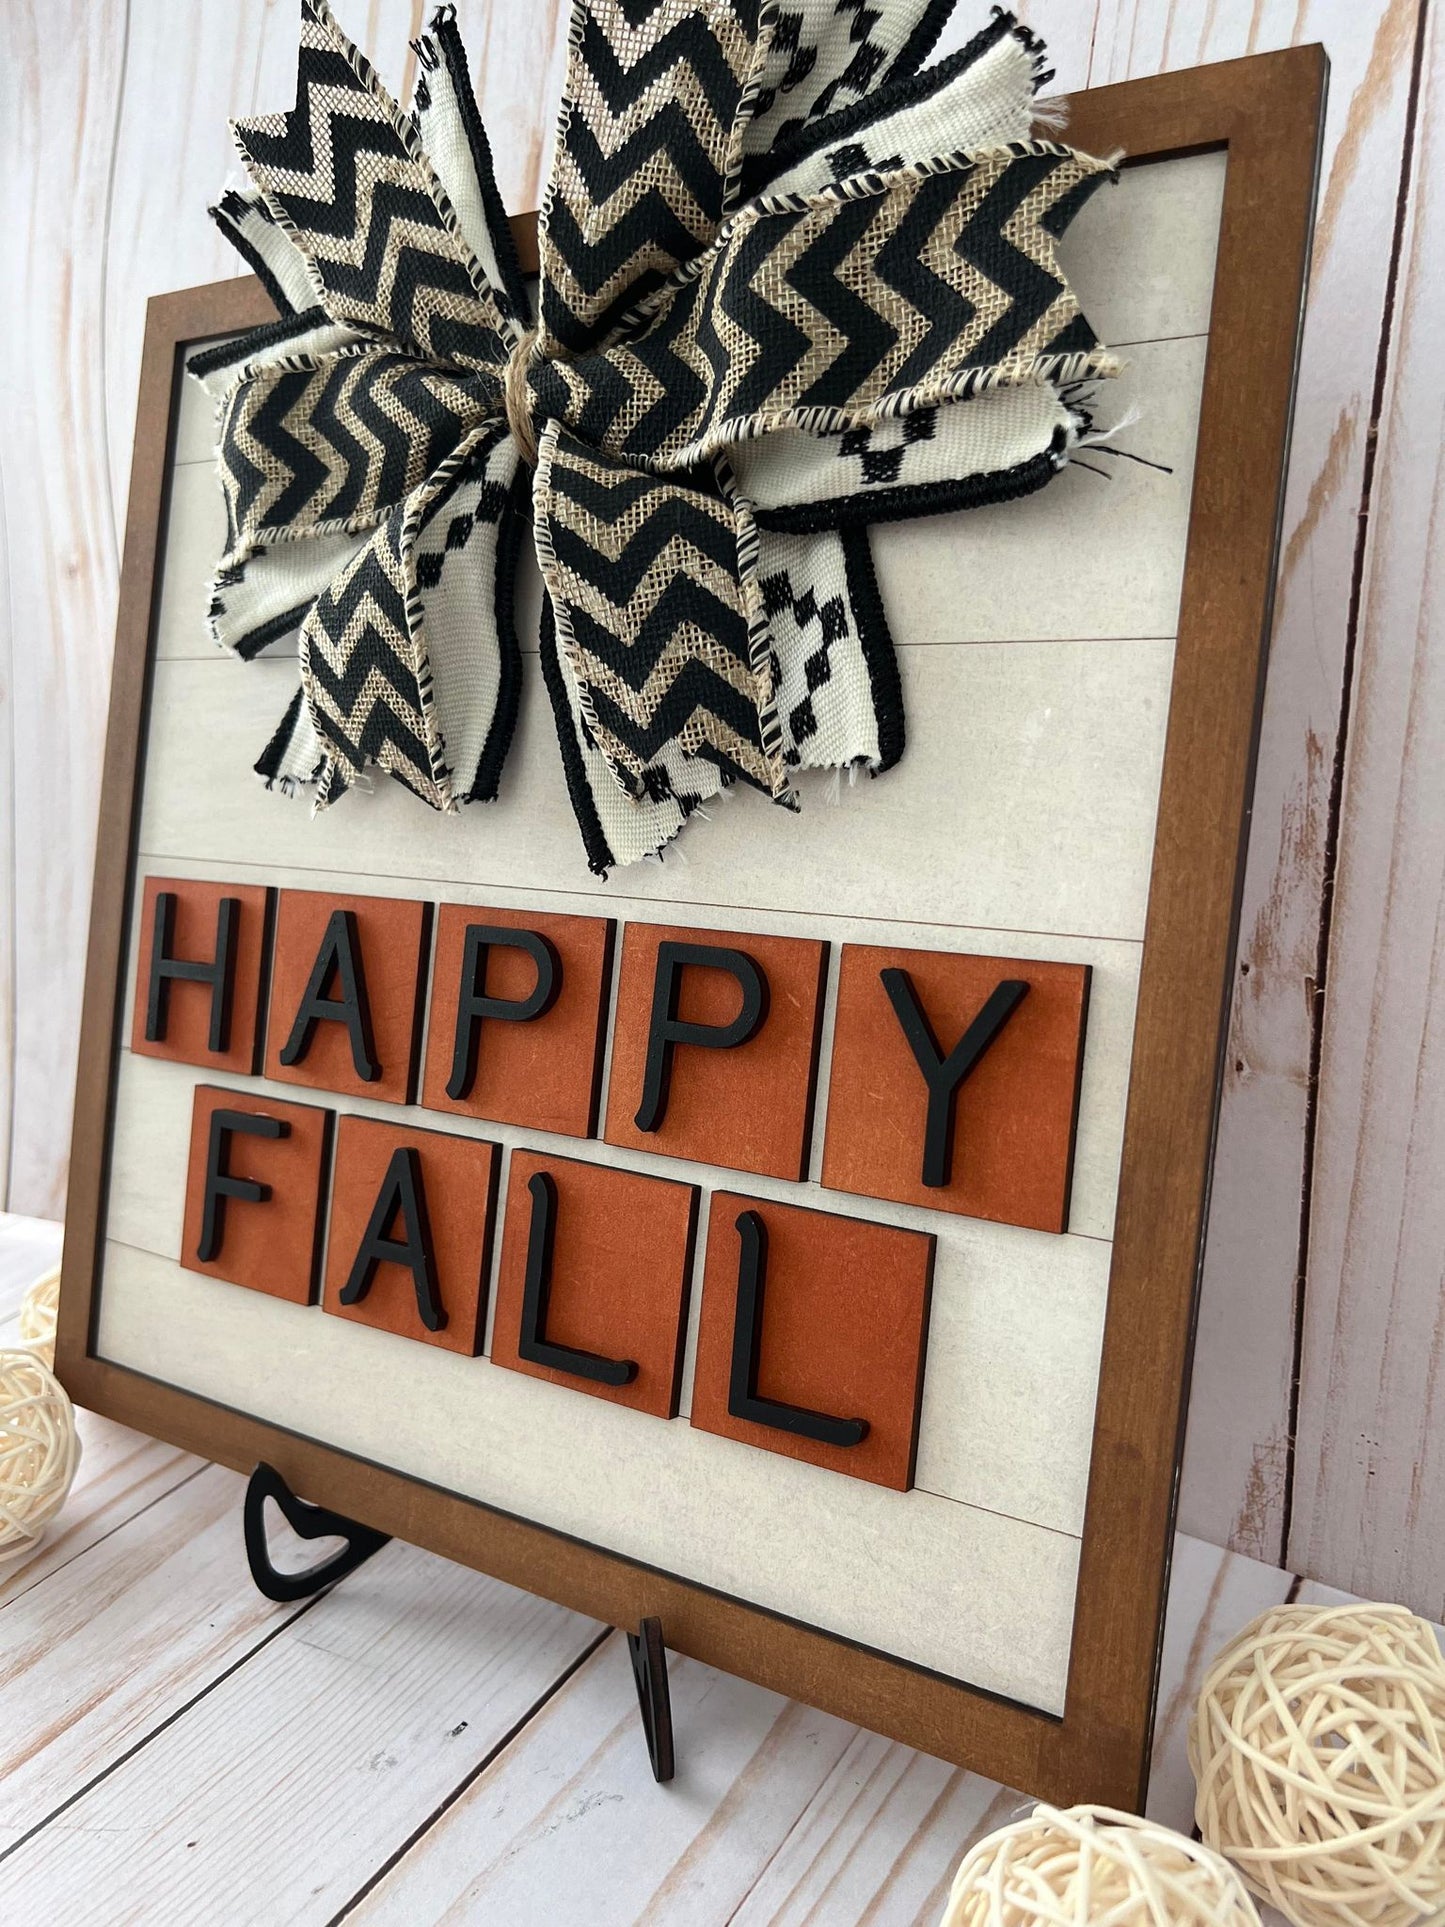 Happy Fall Sign - Ready to Paint Kit